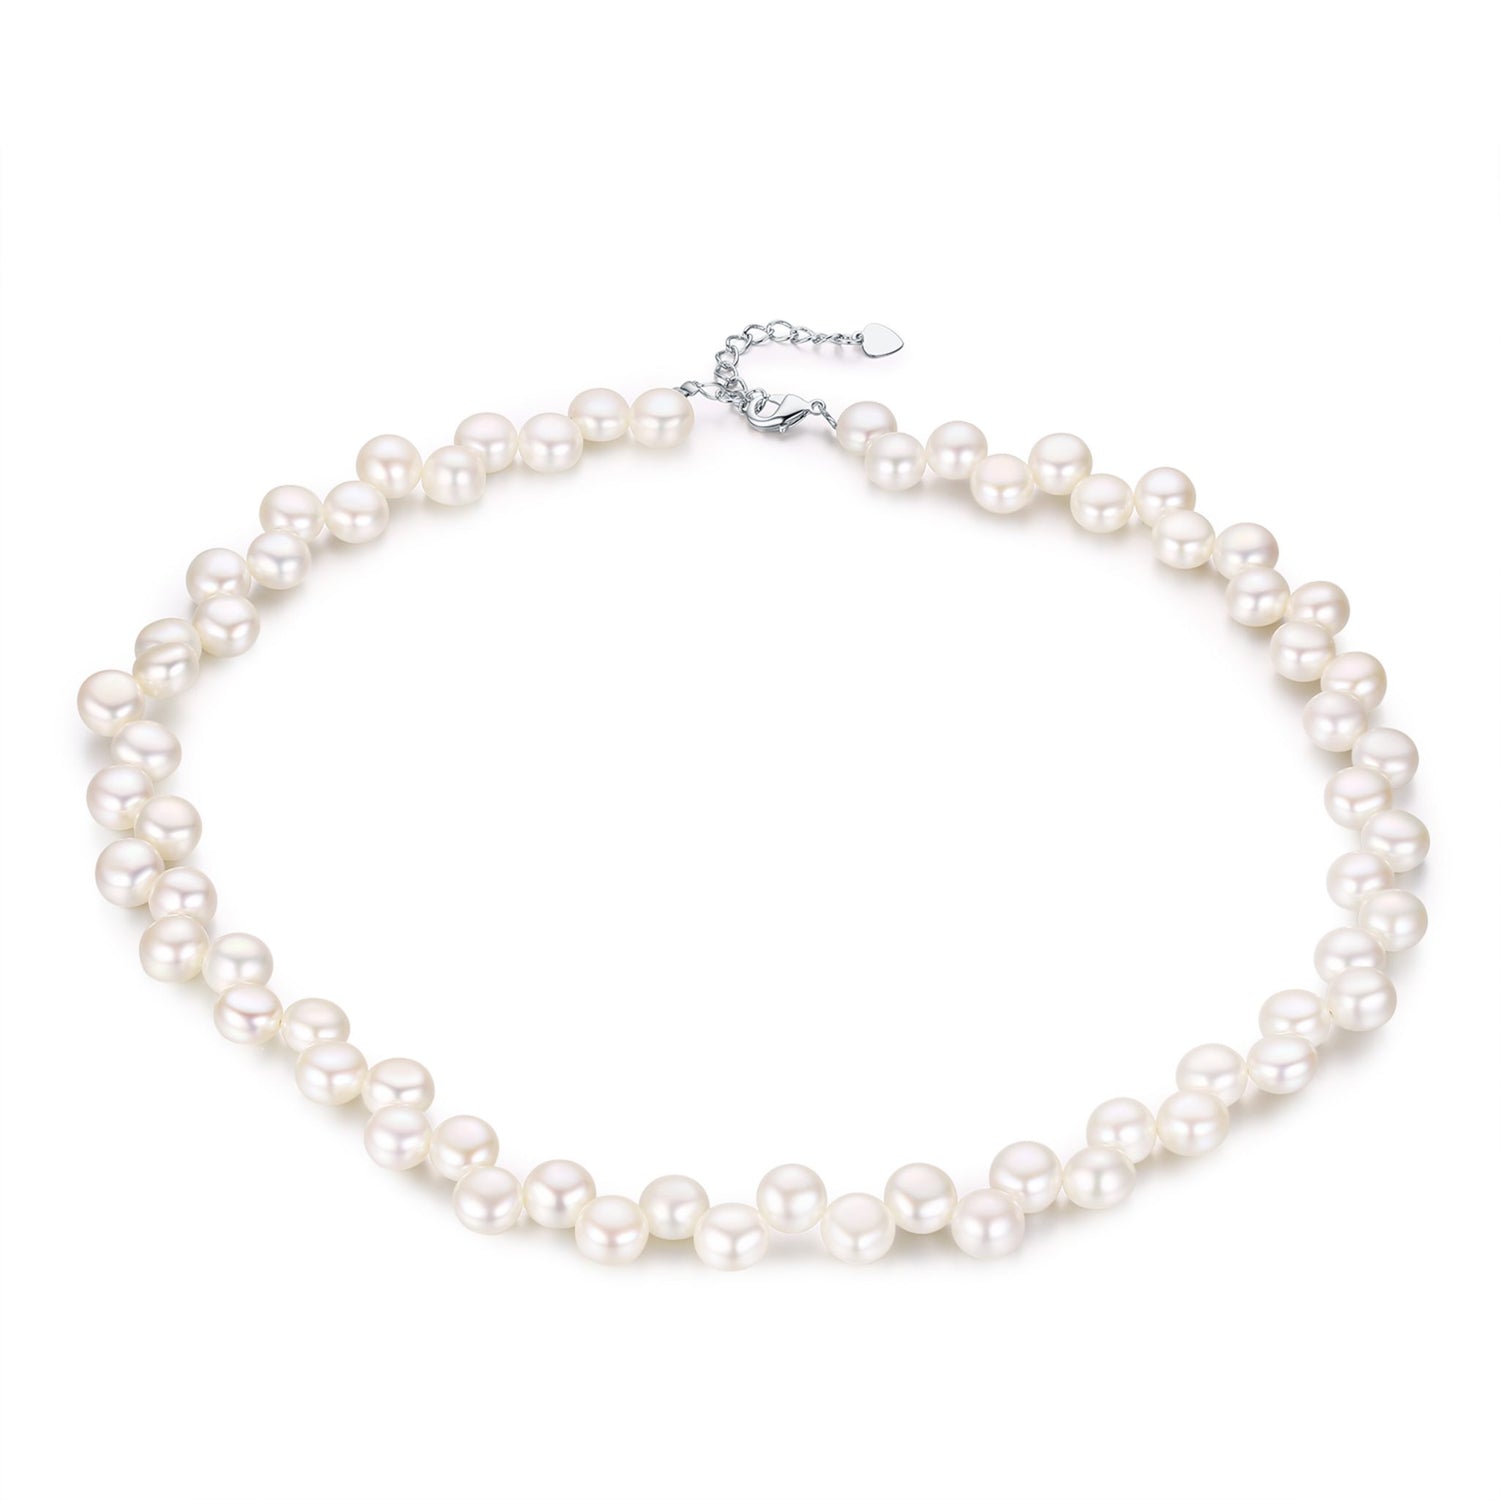 WHITE DANCING PEARL NECKLACE BRACELET SET - Timeless Pearl